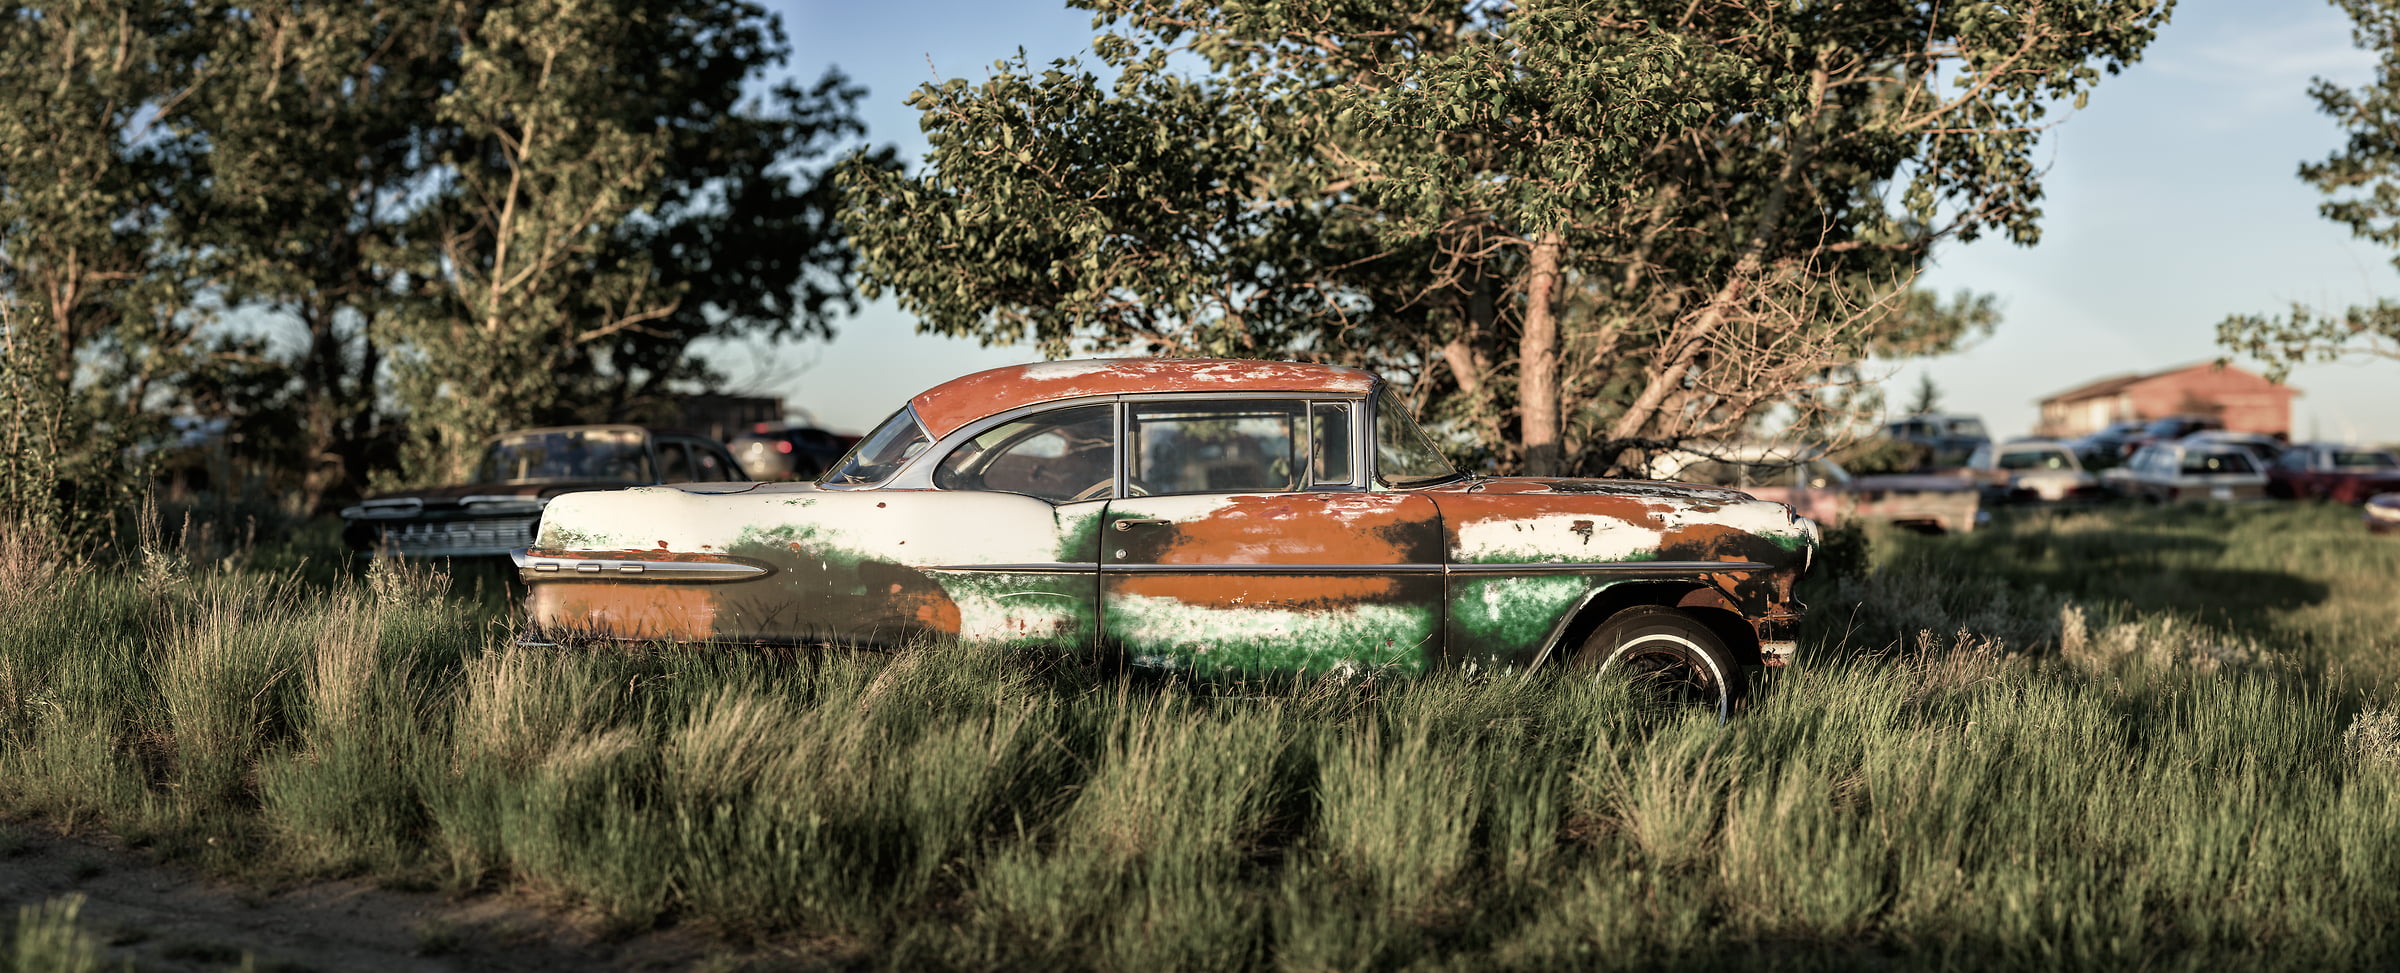 2,292 megapixels! A very high resolution, large-format VAST photo print of a car in a field; nostalgic photograph created by Scott Dimond.